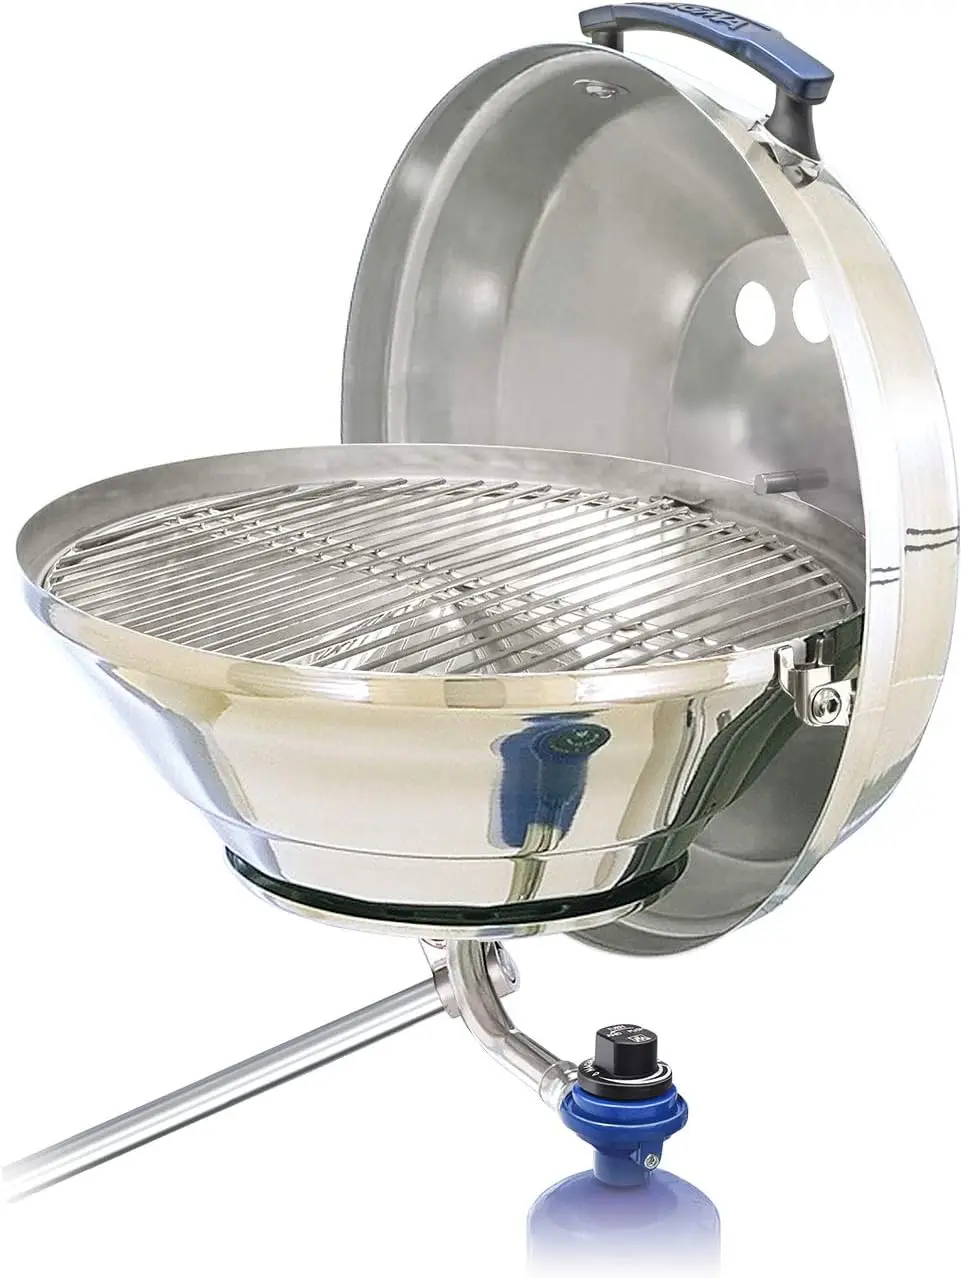 

Magma Products, Original Size Marine Kettle Gas Grill, A10-205